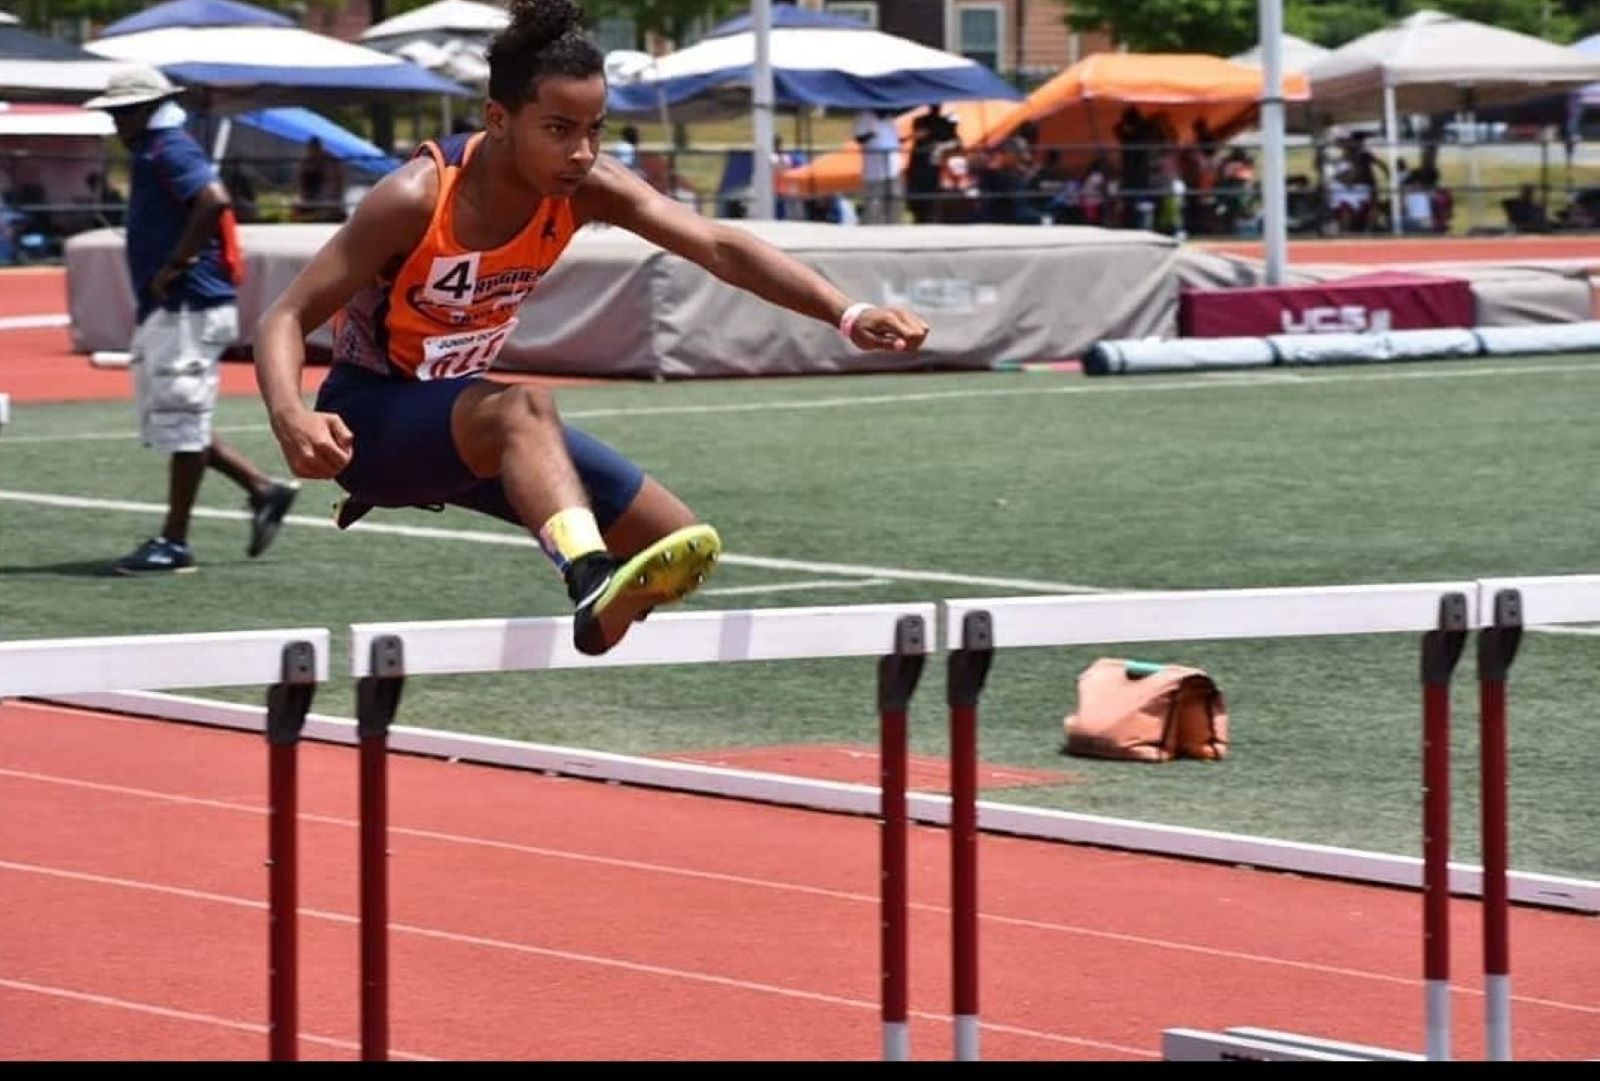 Deverin King jumps over a hurdle at a track meet in 2018